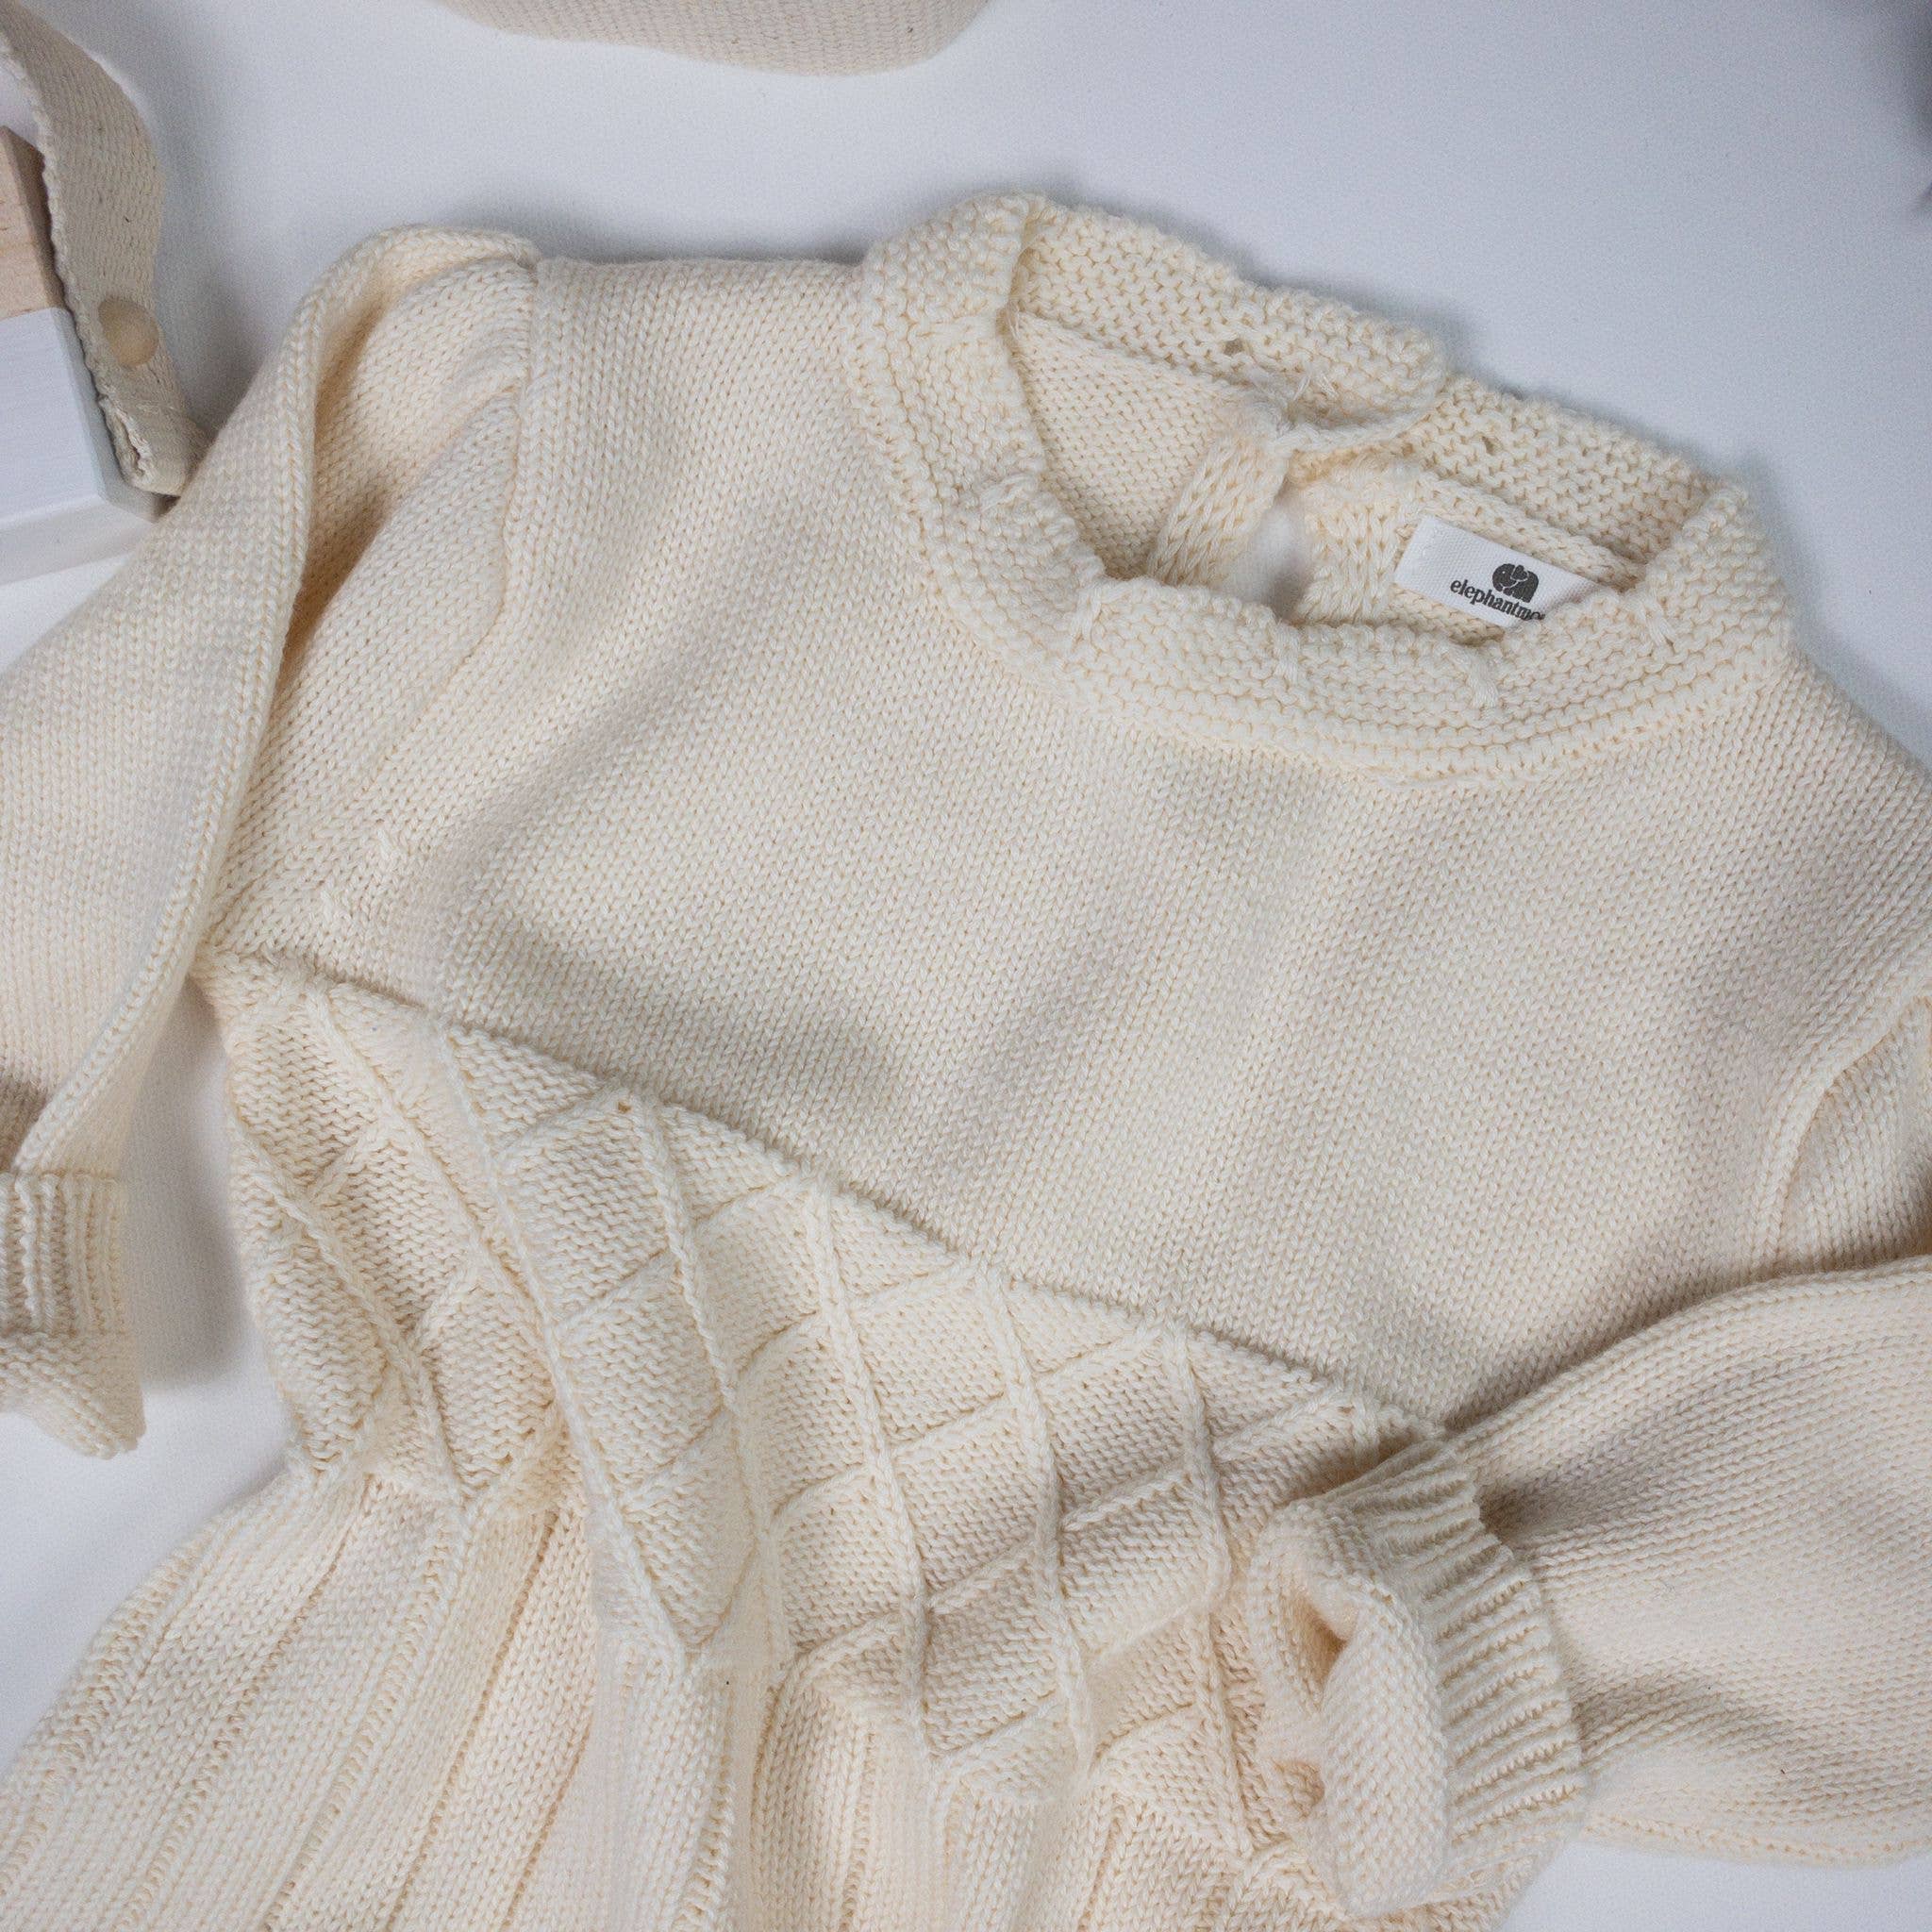 Cream Knitted Baby Onesie - Baby Clothes - JumpSuit: 12-18M